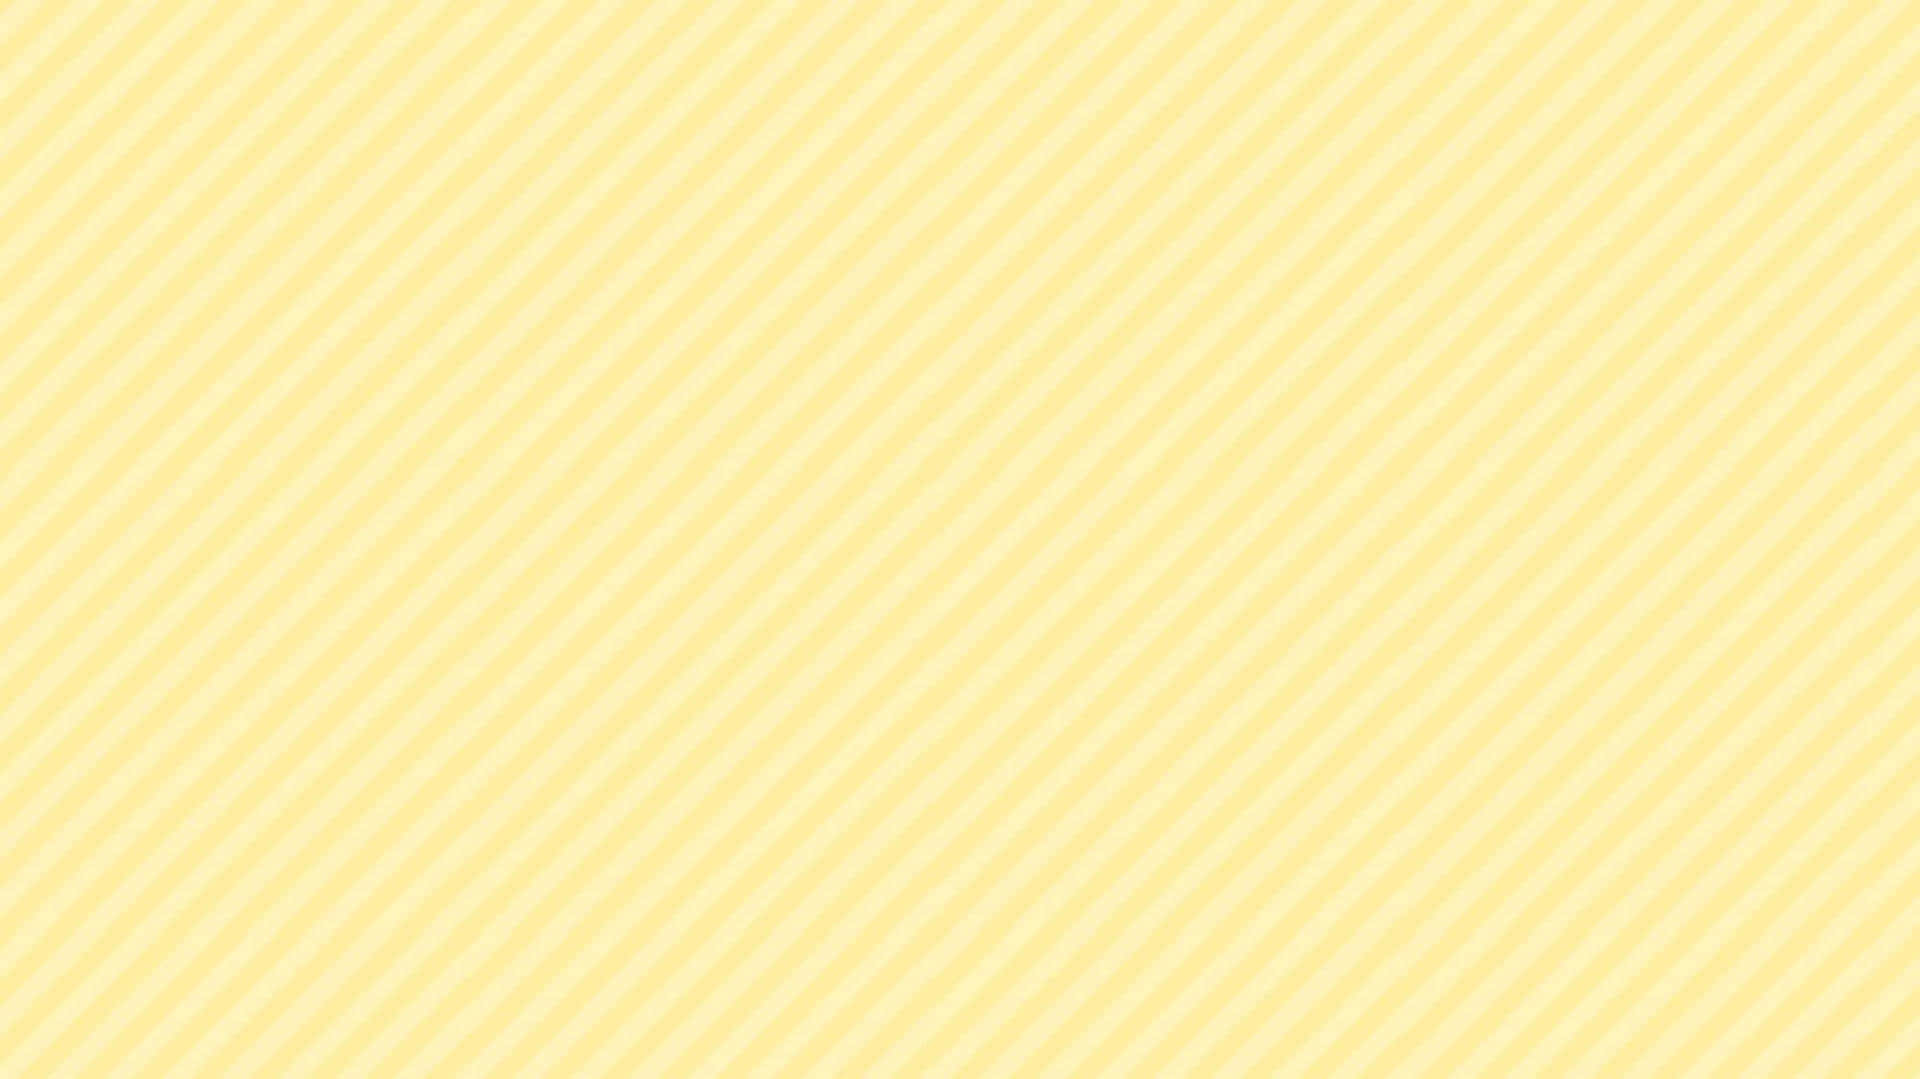 Download A Yellow And White Striped Background Wallpaper | Wallpapers.com